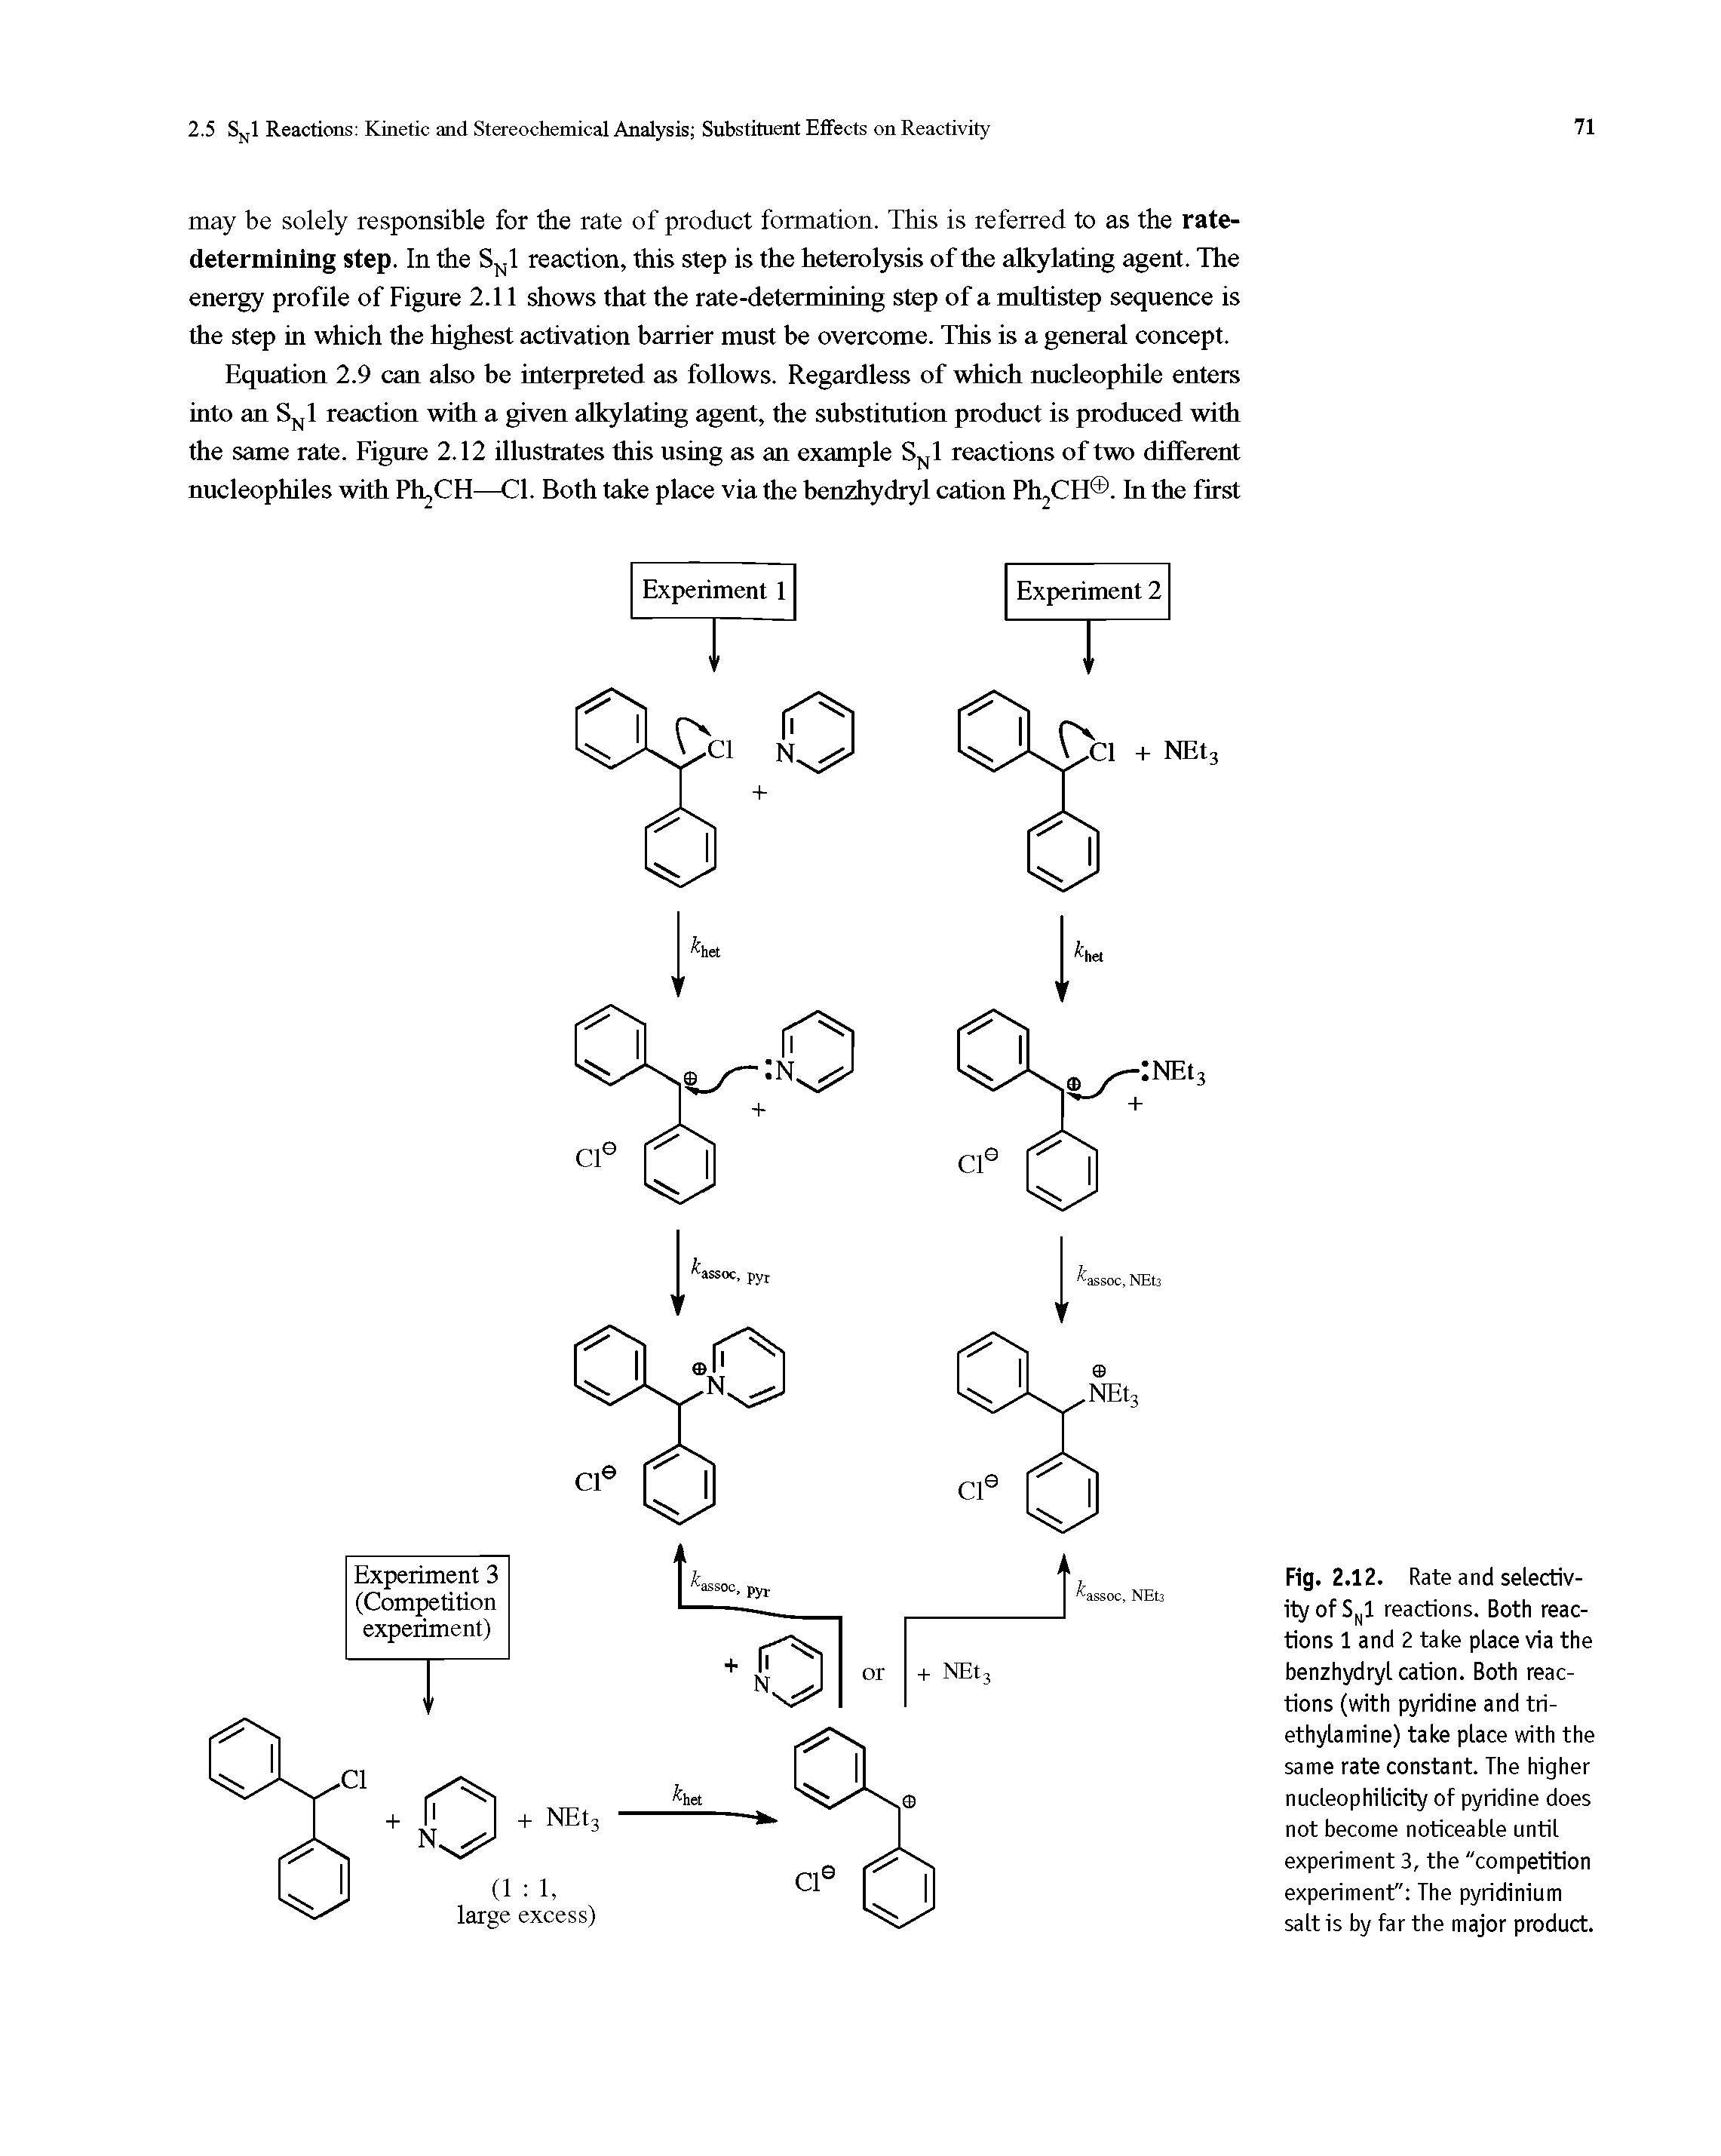 Fig. 2.12. Rate and selectivity of SN1 reactions. Both reactions 1 and 2 take place via the benzhydryl cation. Both reactions (with pyridine and tri-ethylamine) take place with the same rate constant. The higher nucleophilicity of pyridine does not become noticeable until experiment 3, the "competition experiment" The pyridinium salt is by far the major product.